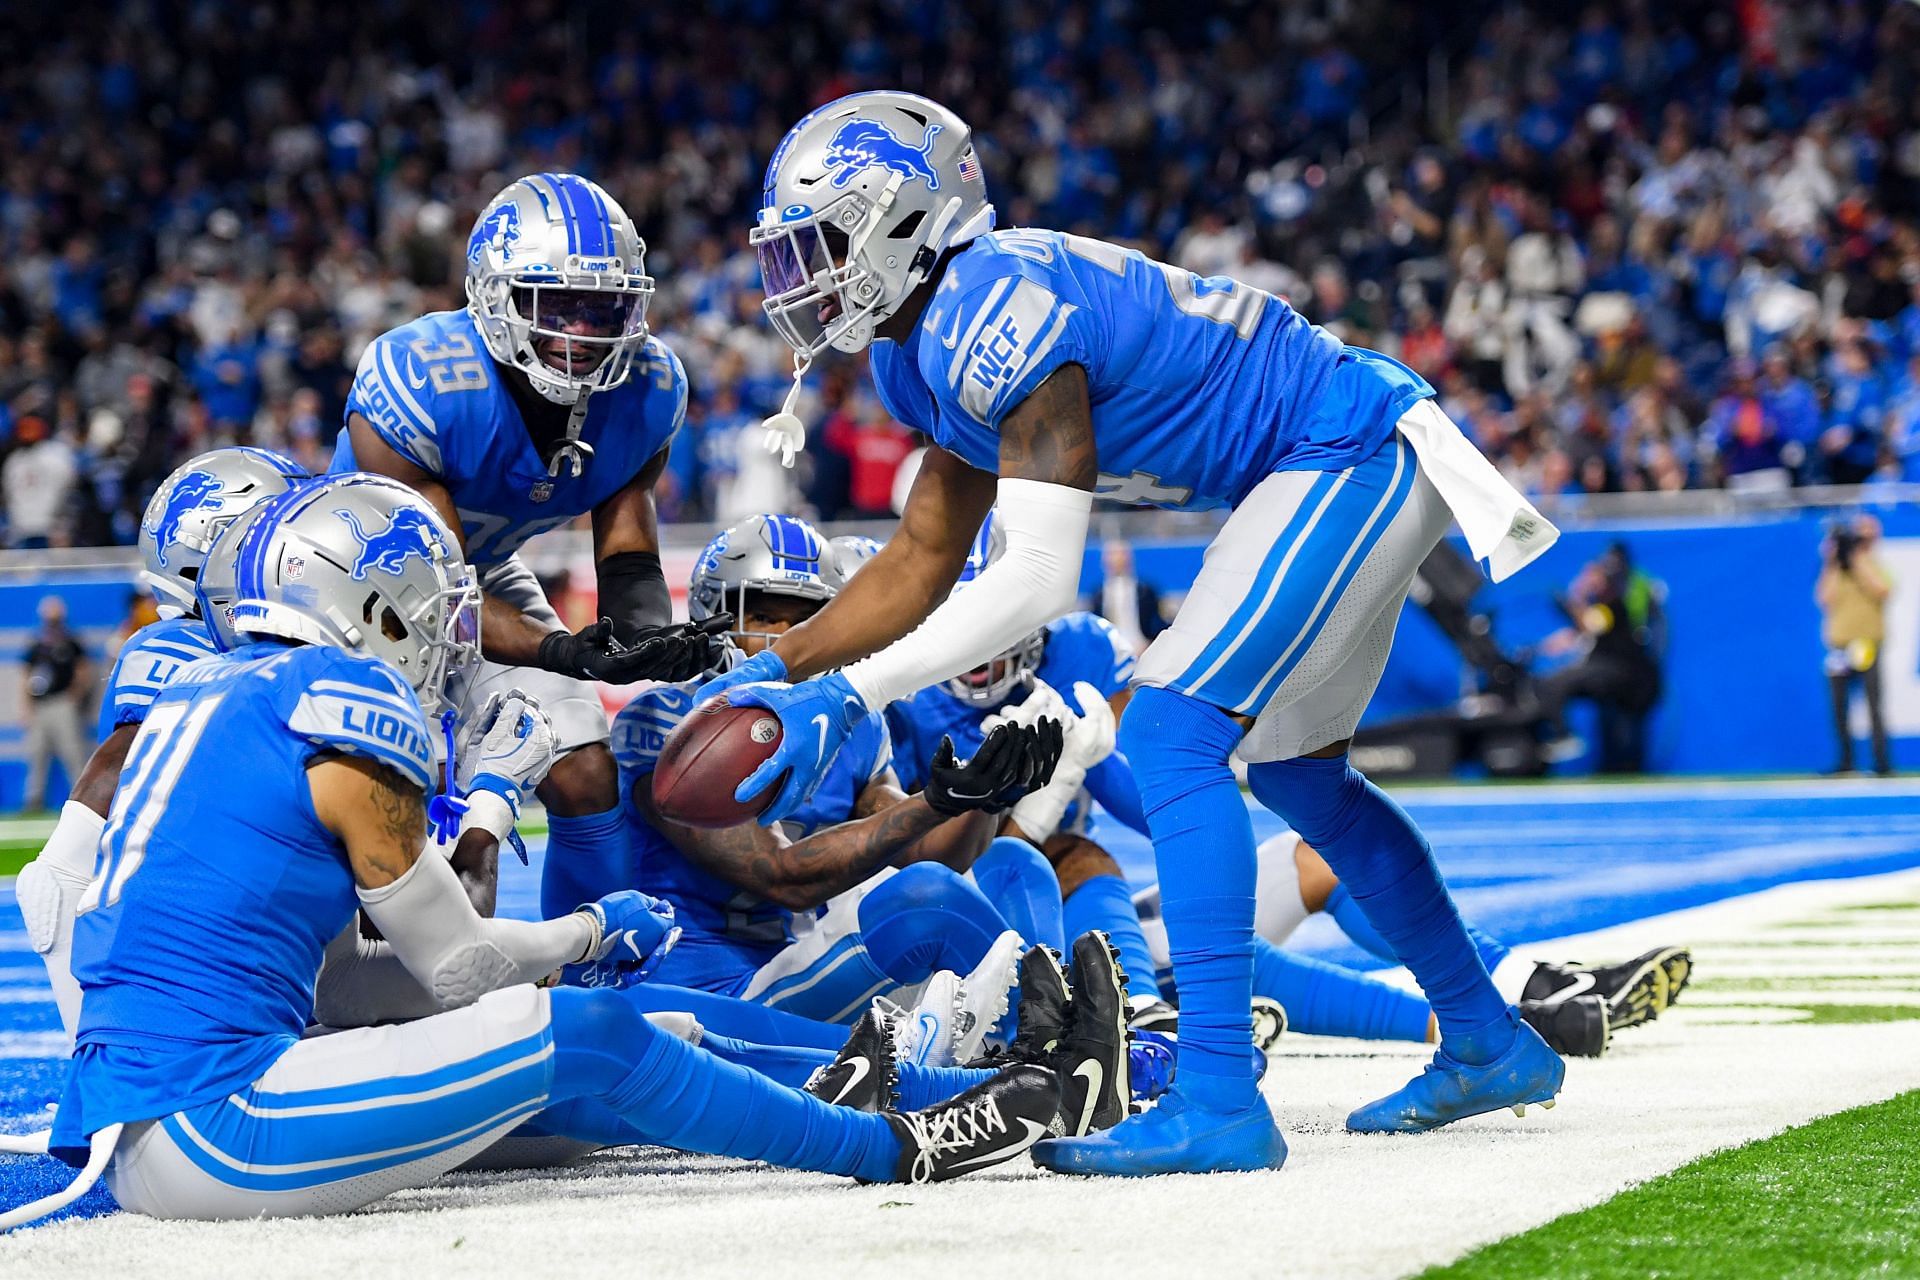 Lions become first league team to finish season 0-16